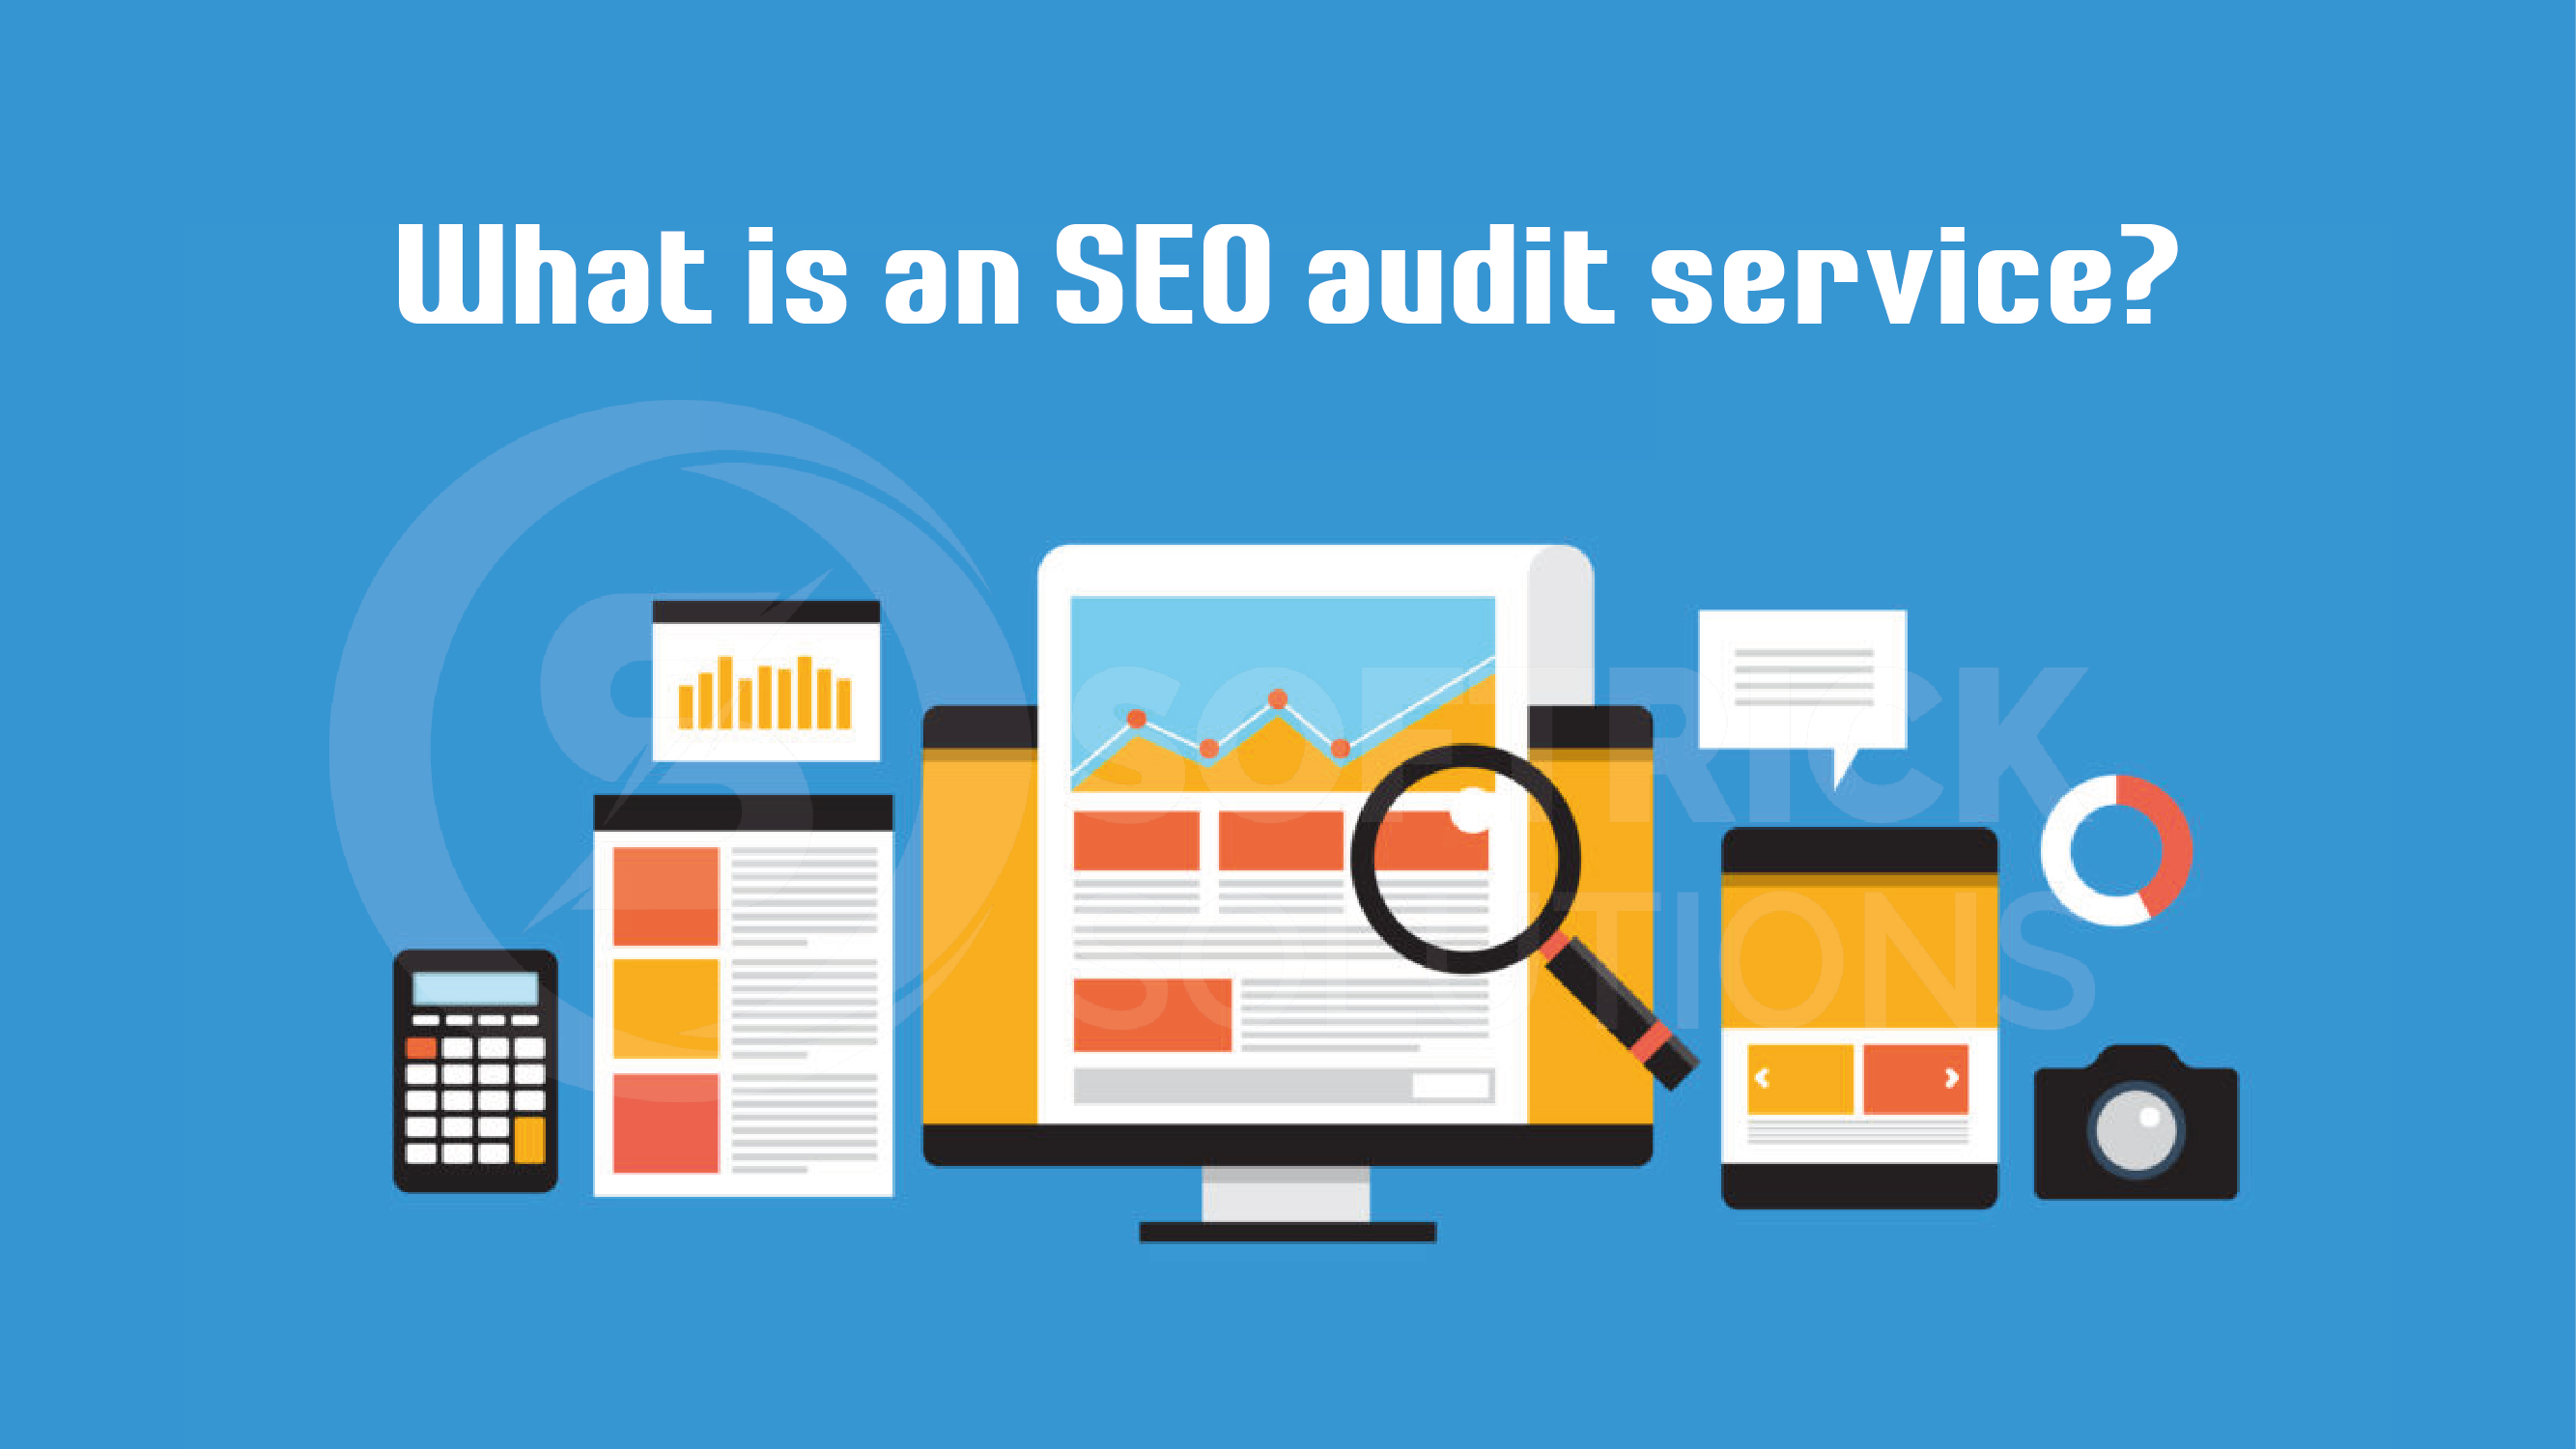 What is an SEO audit service